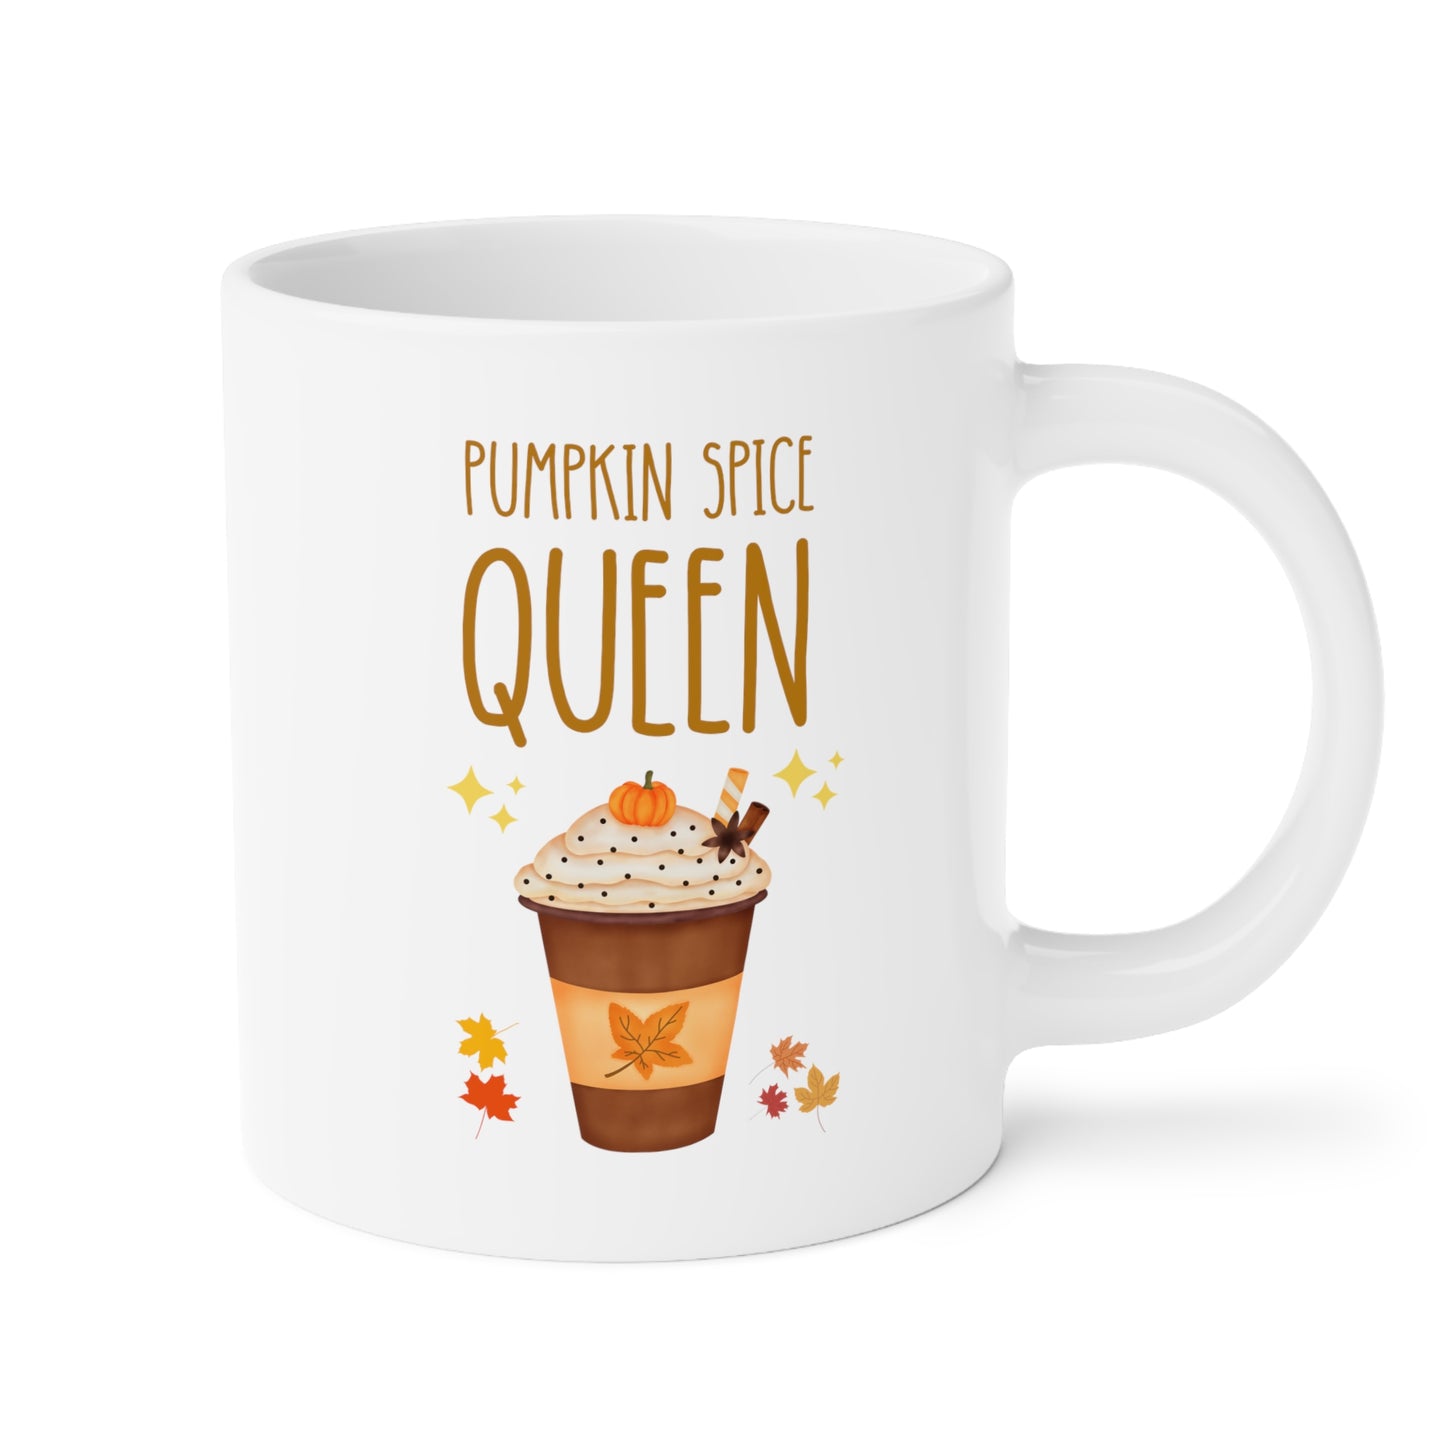 Pumpkin Spice Queen 20oz white funny large coffee mug gift for latte lover halloween decoration autumn fall thanksgiving waveywares wavey wares wavywares wavy wares